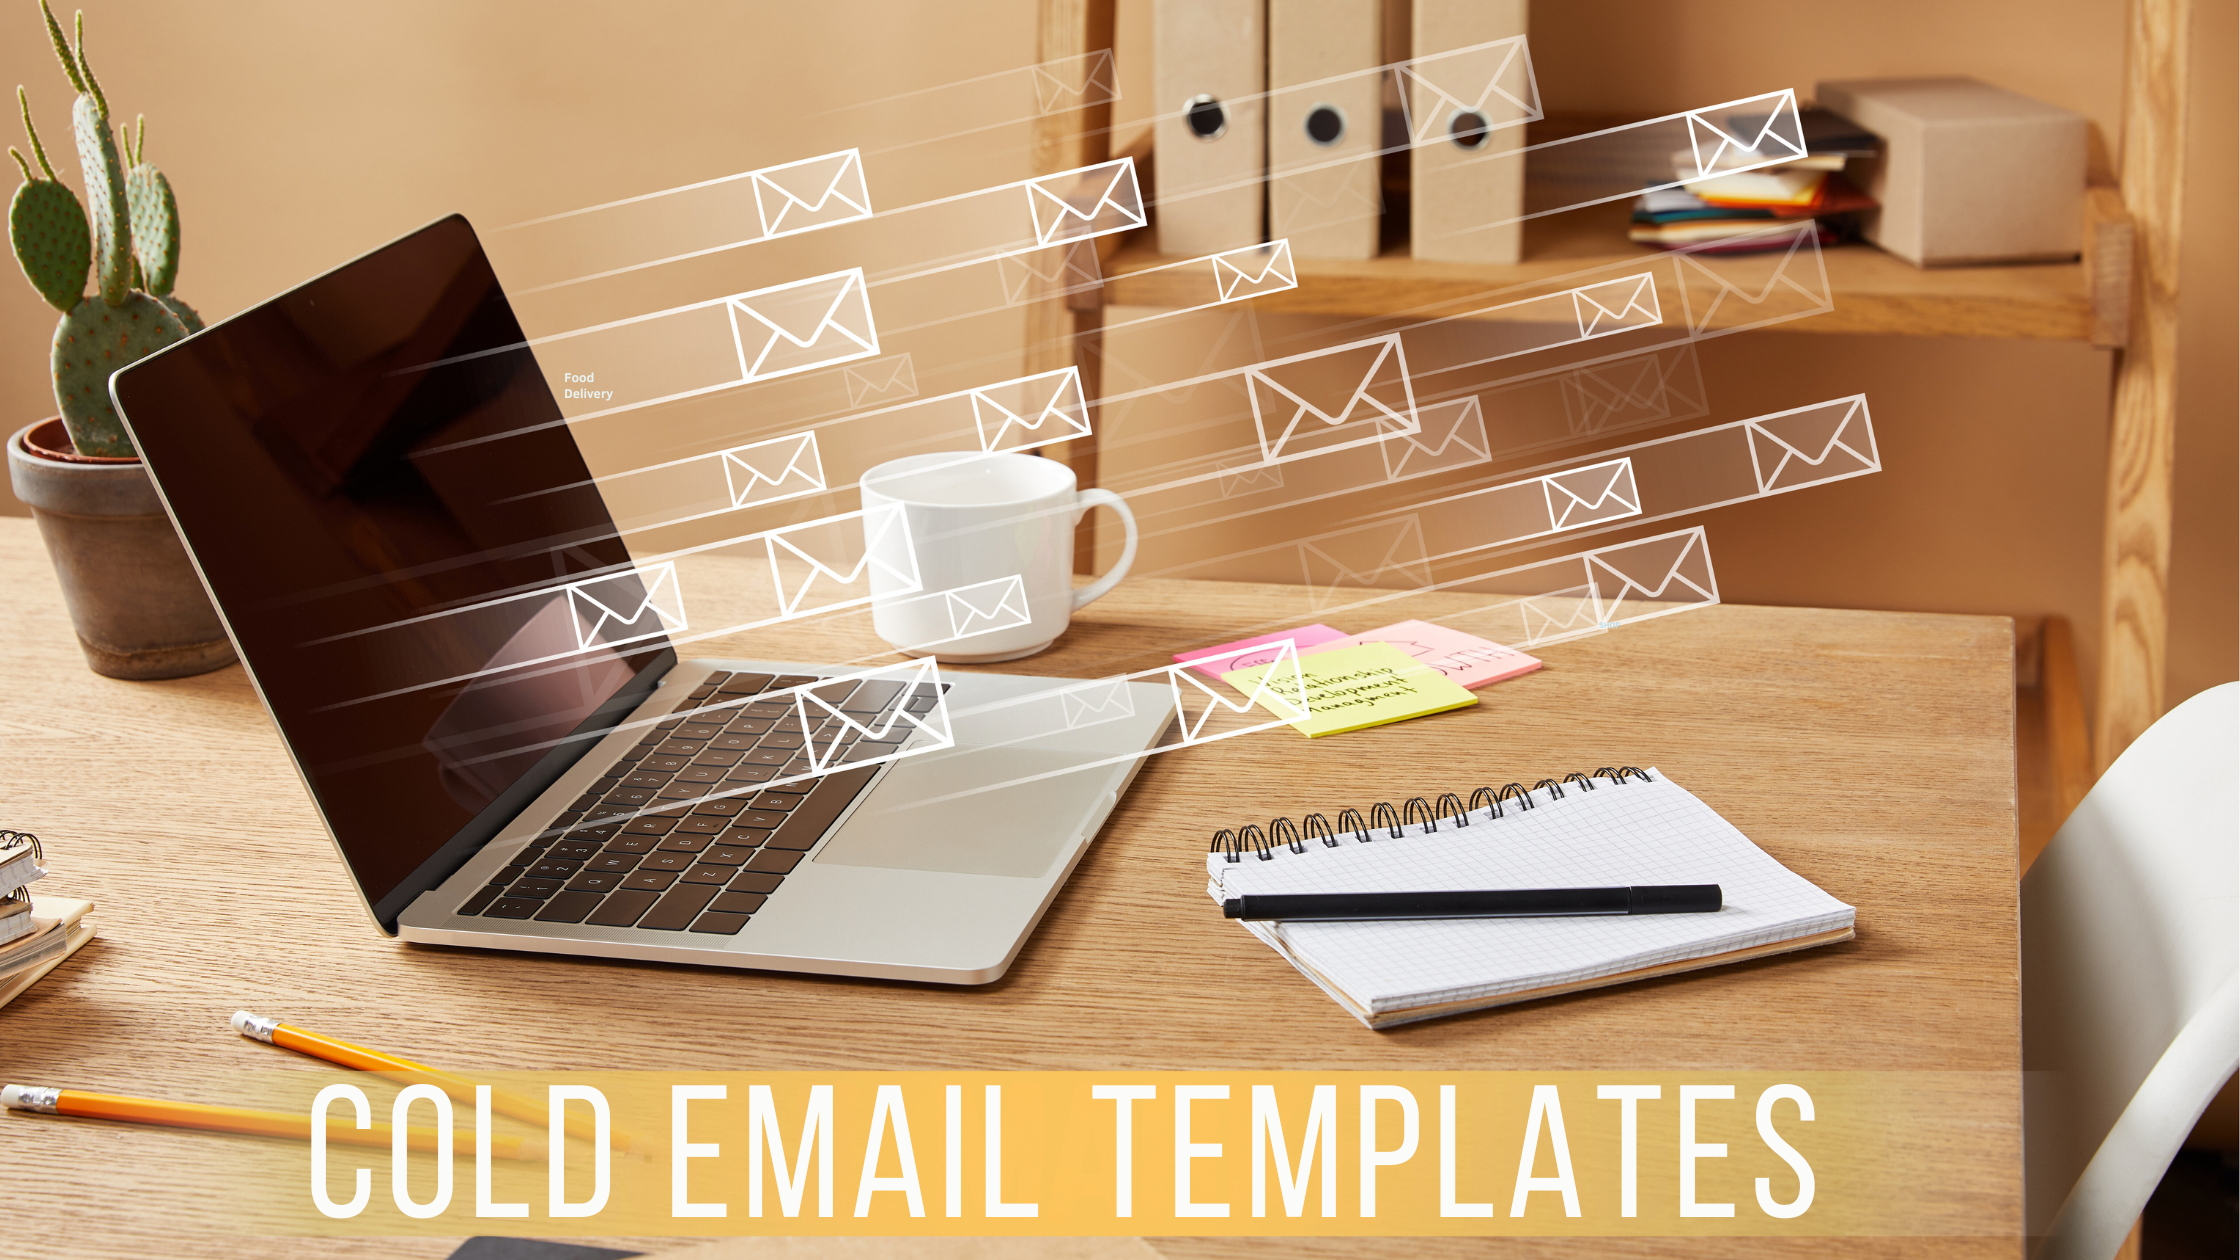 Cold email templates that work